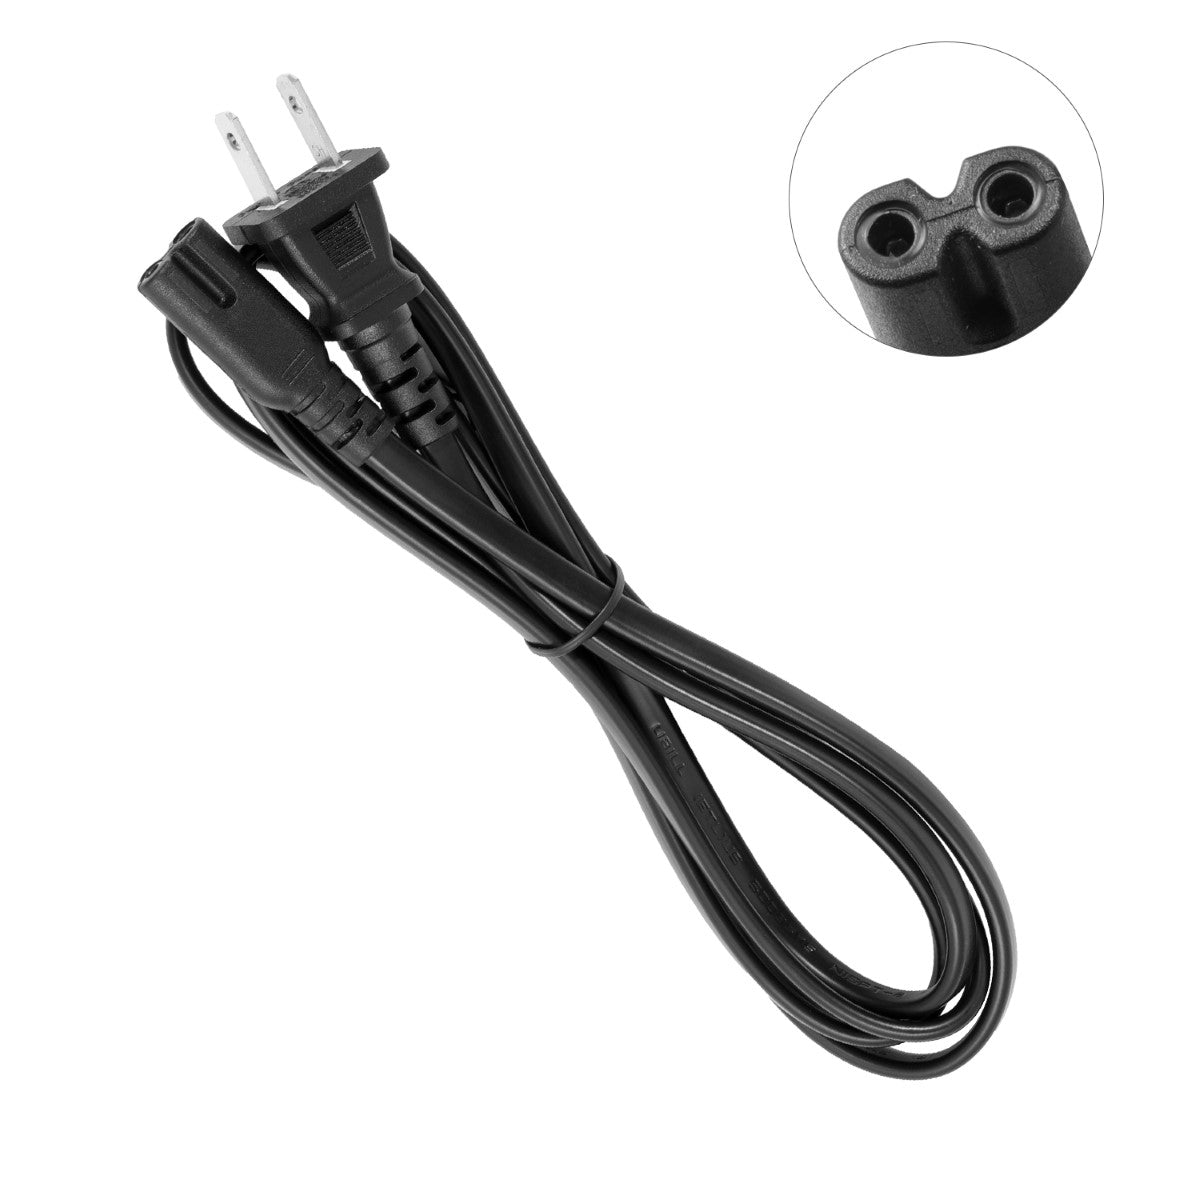 Power Cord for HP Officejet Pro X551 Printer.